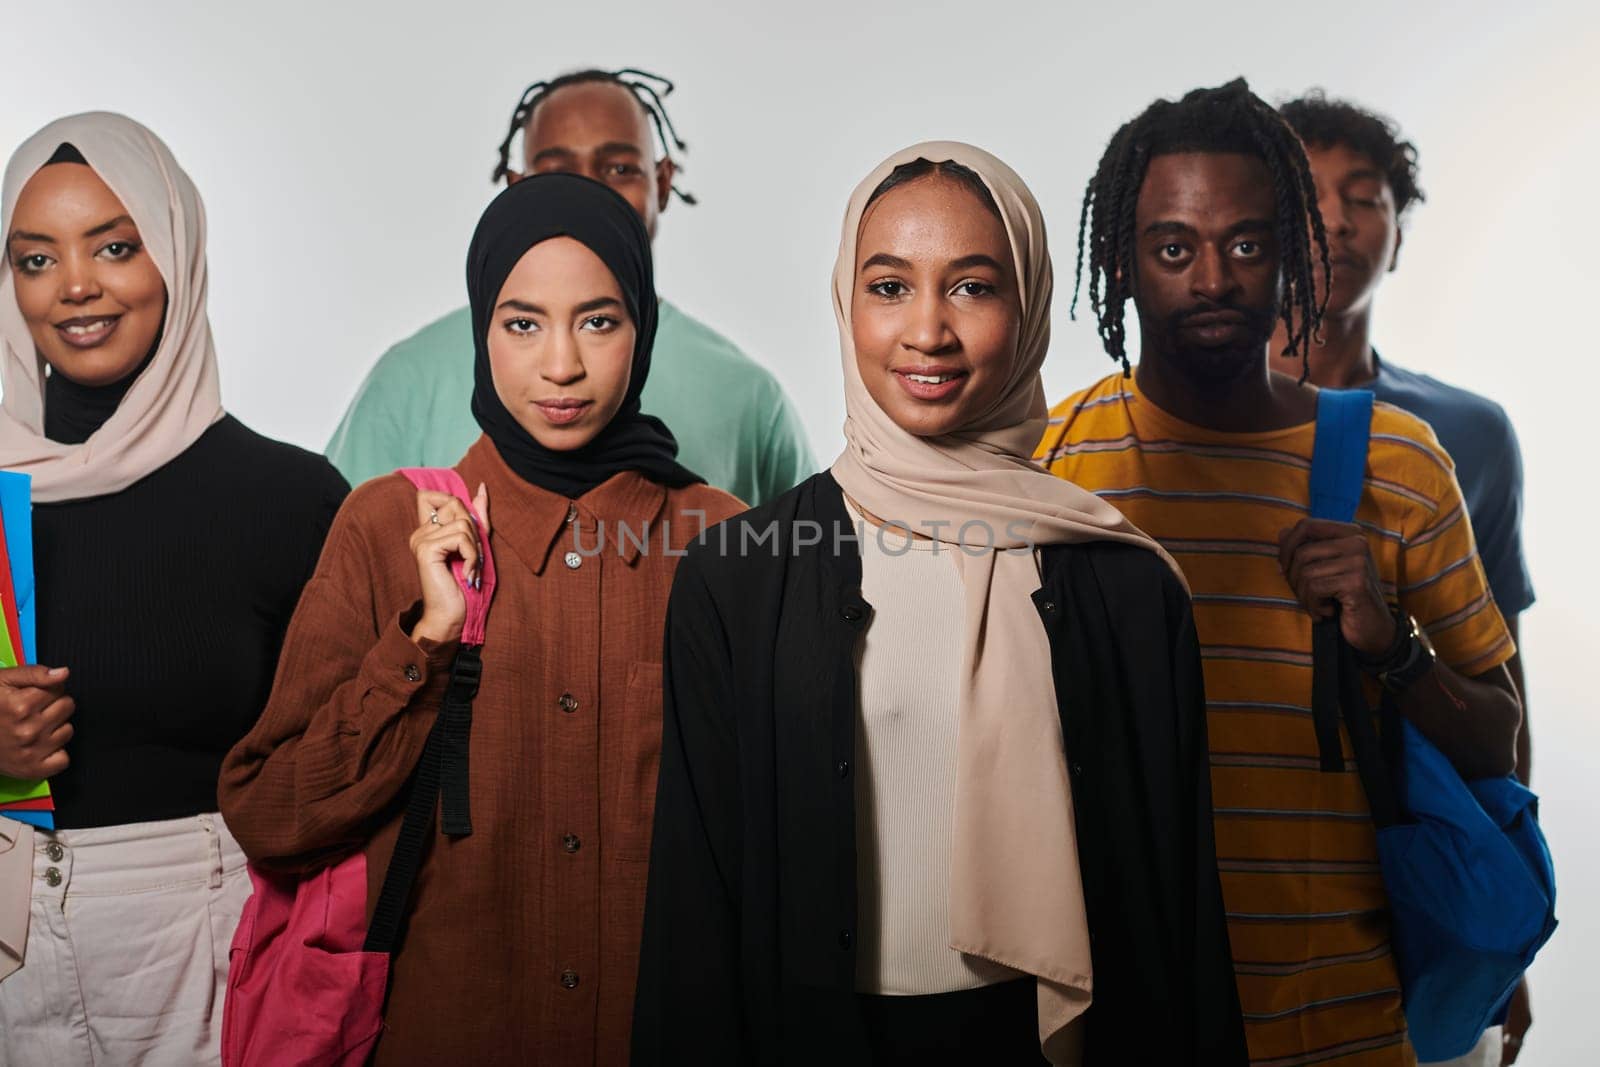 In a vibrant display of educational diversity, a group of students strikes a pose against a clean white background, holding backpacks, laptops, and tablets, symbolizing a blend of modern technology, unity, and cultural inclusivity in their academic journey by dotshock